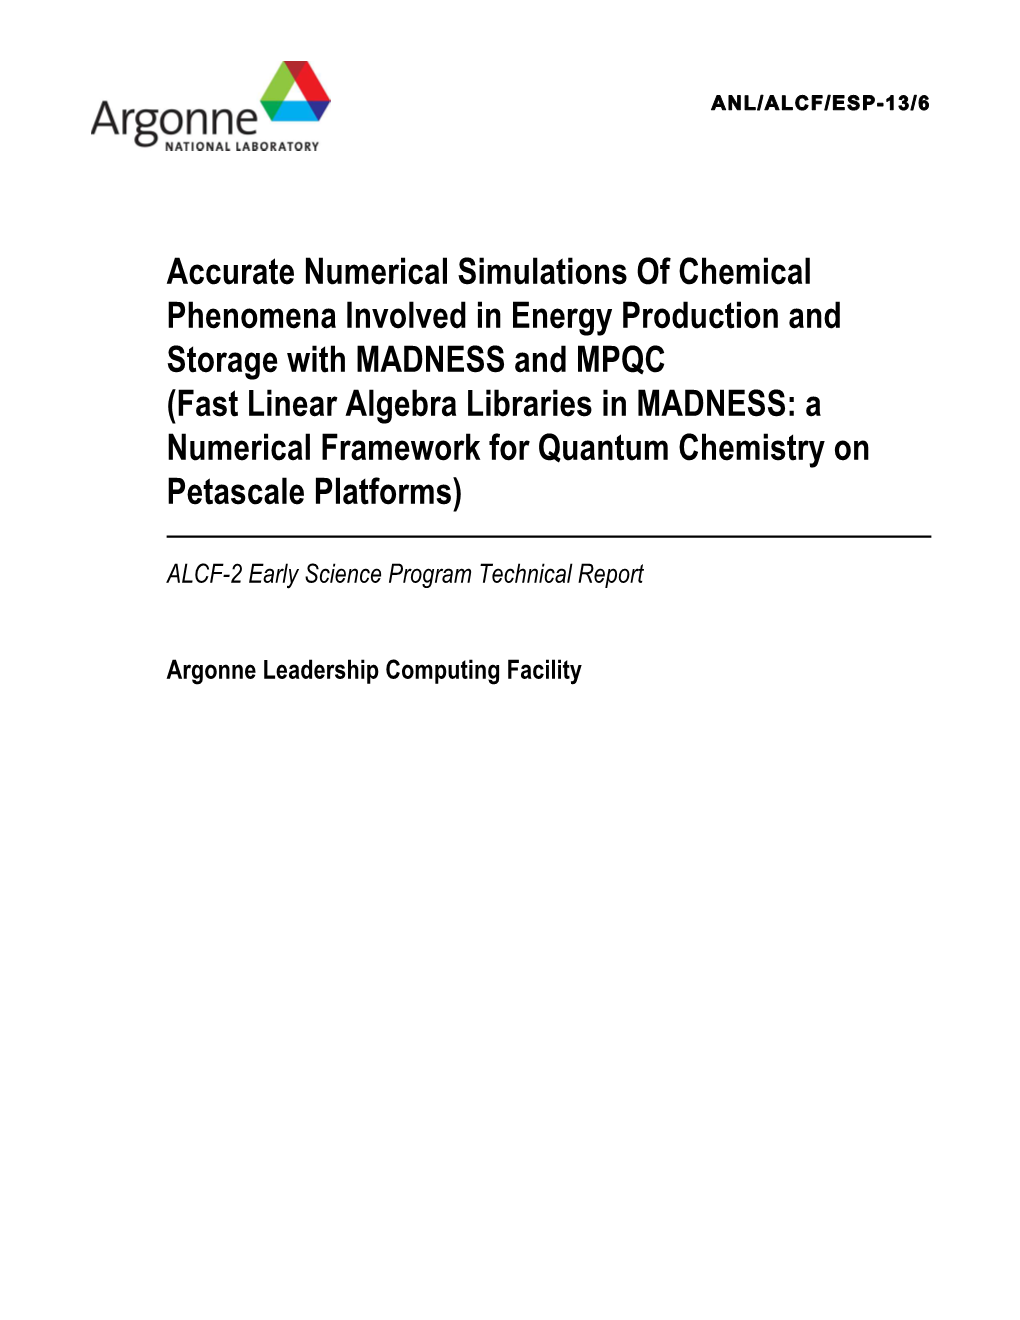 Accurate Numerical Simulations of Chemical Phenomena Involved in Energy Production and Storage with MADNESS and MPQC